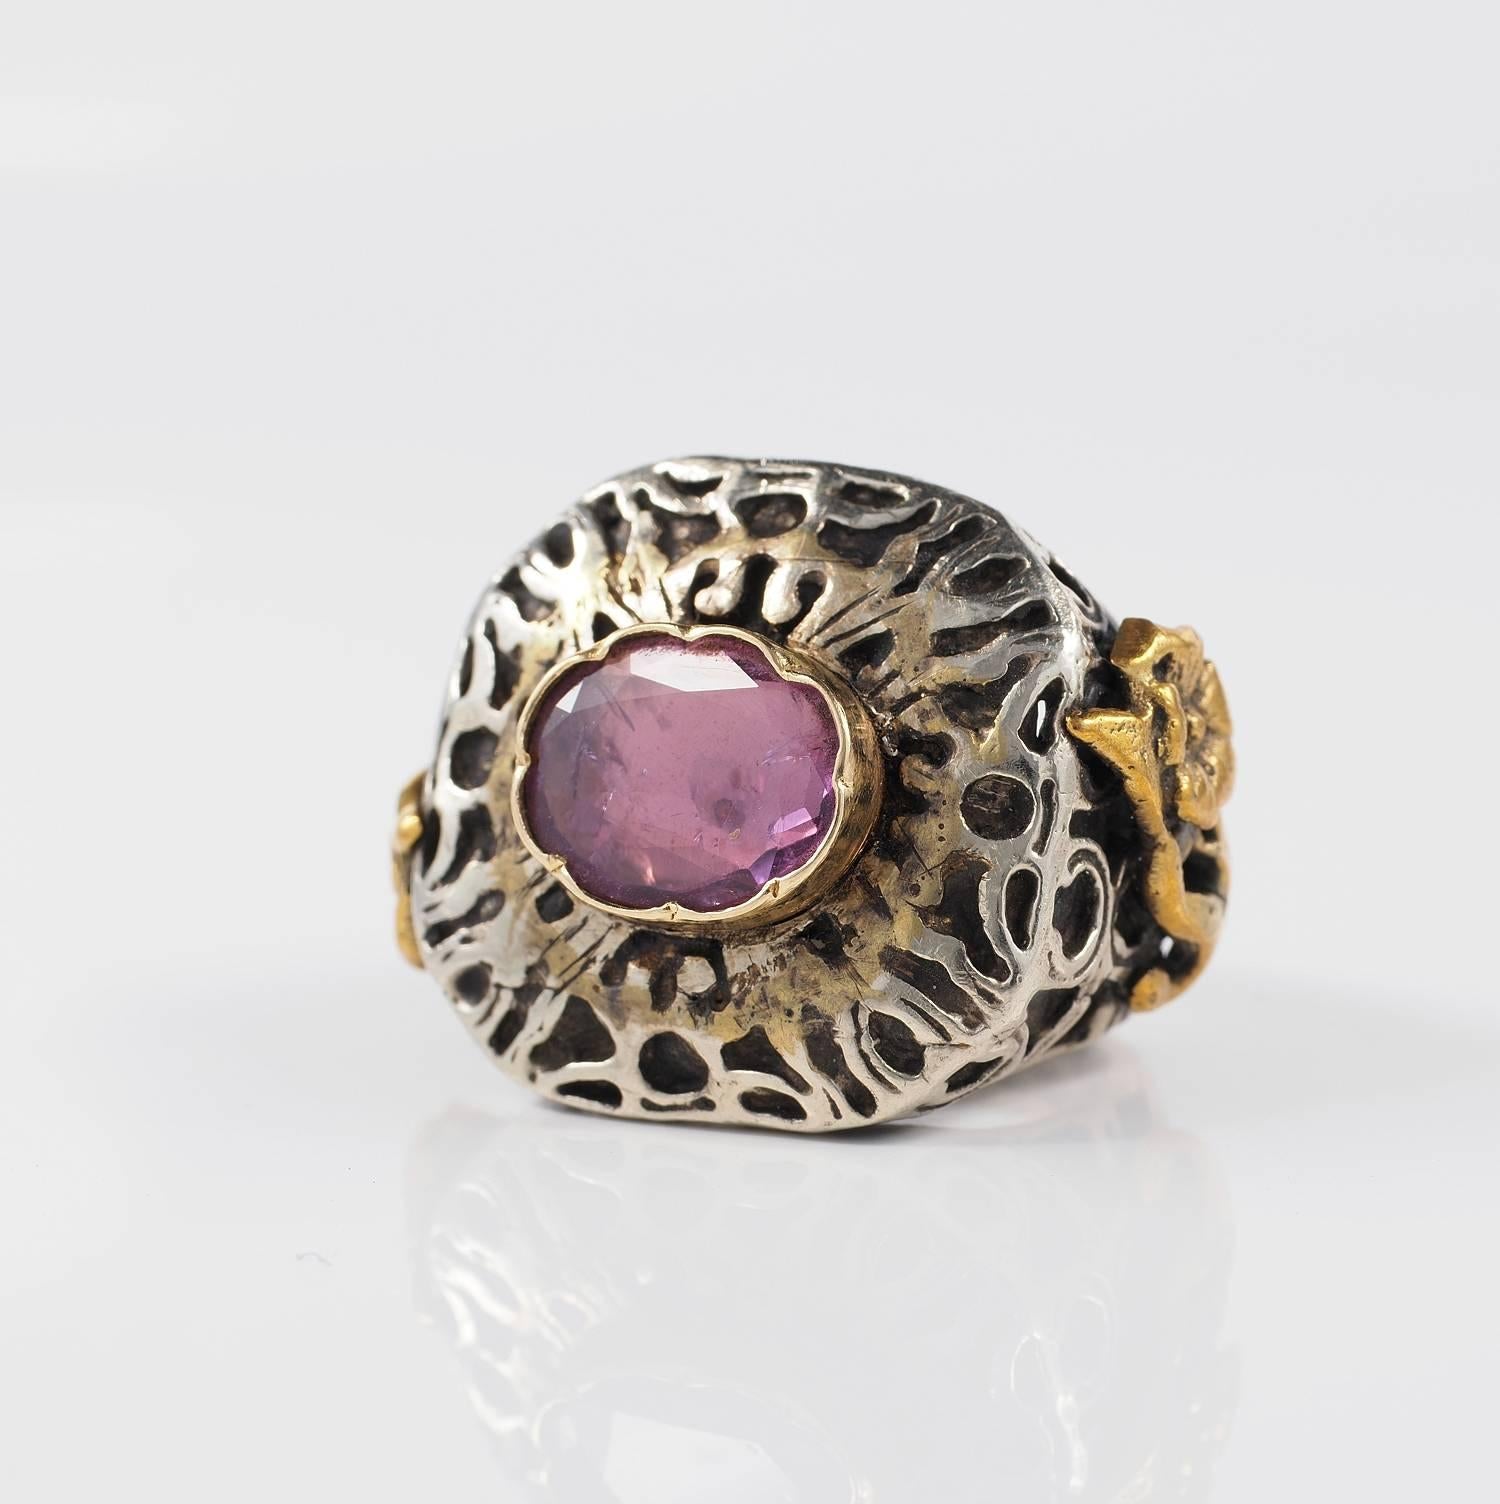 Fabulous rare find! 16th century to design expressing the fashion in vogue at that time.
Hand  crafted of solid silver and 16 KT gold tested. Italian origin.
Boasting a flat cut natural - not treated Ruby of light colour hue approx 3.50 Ct.
Fine